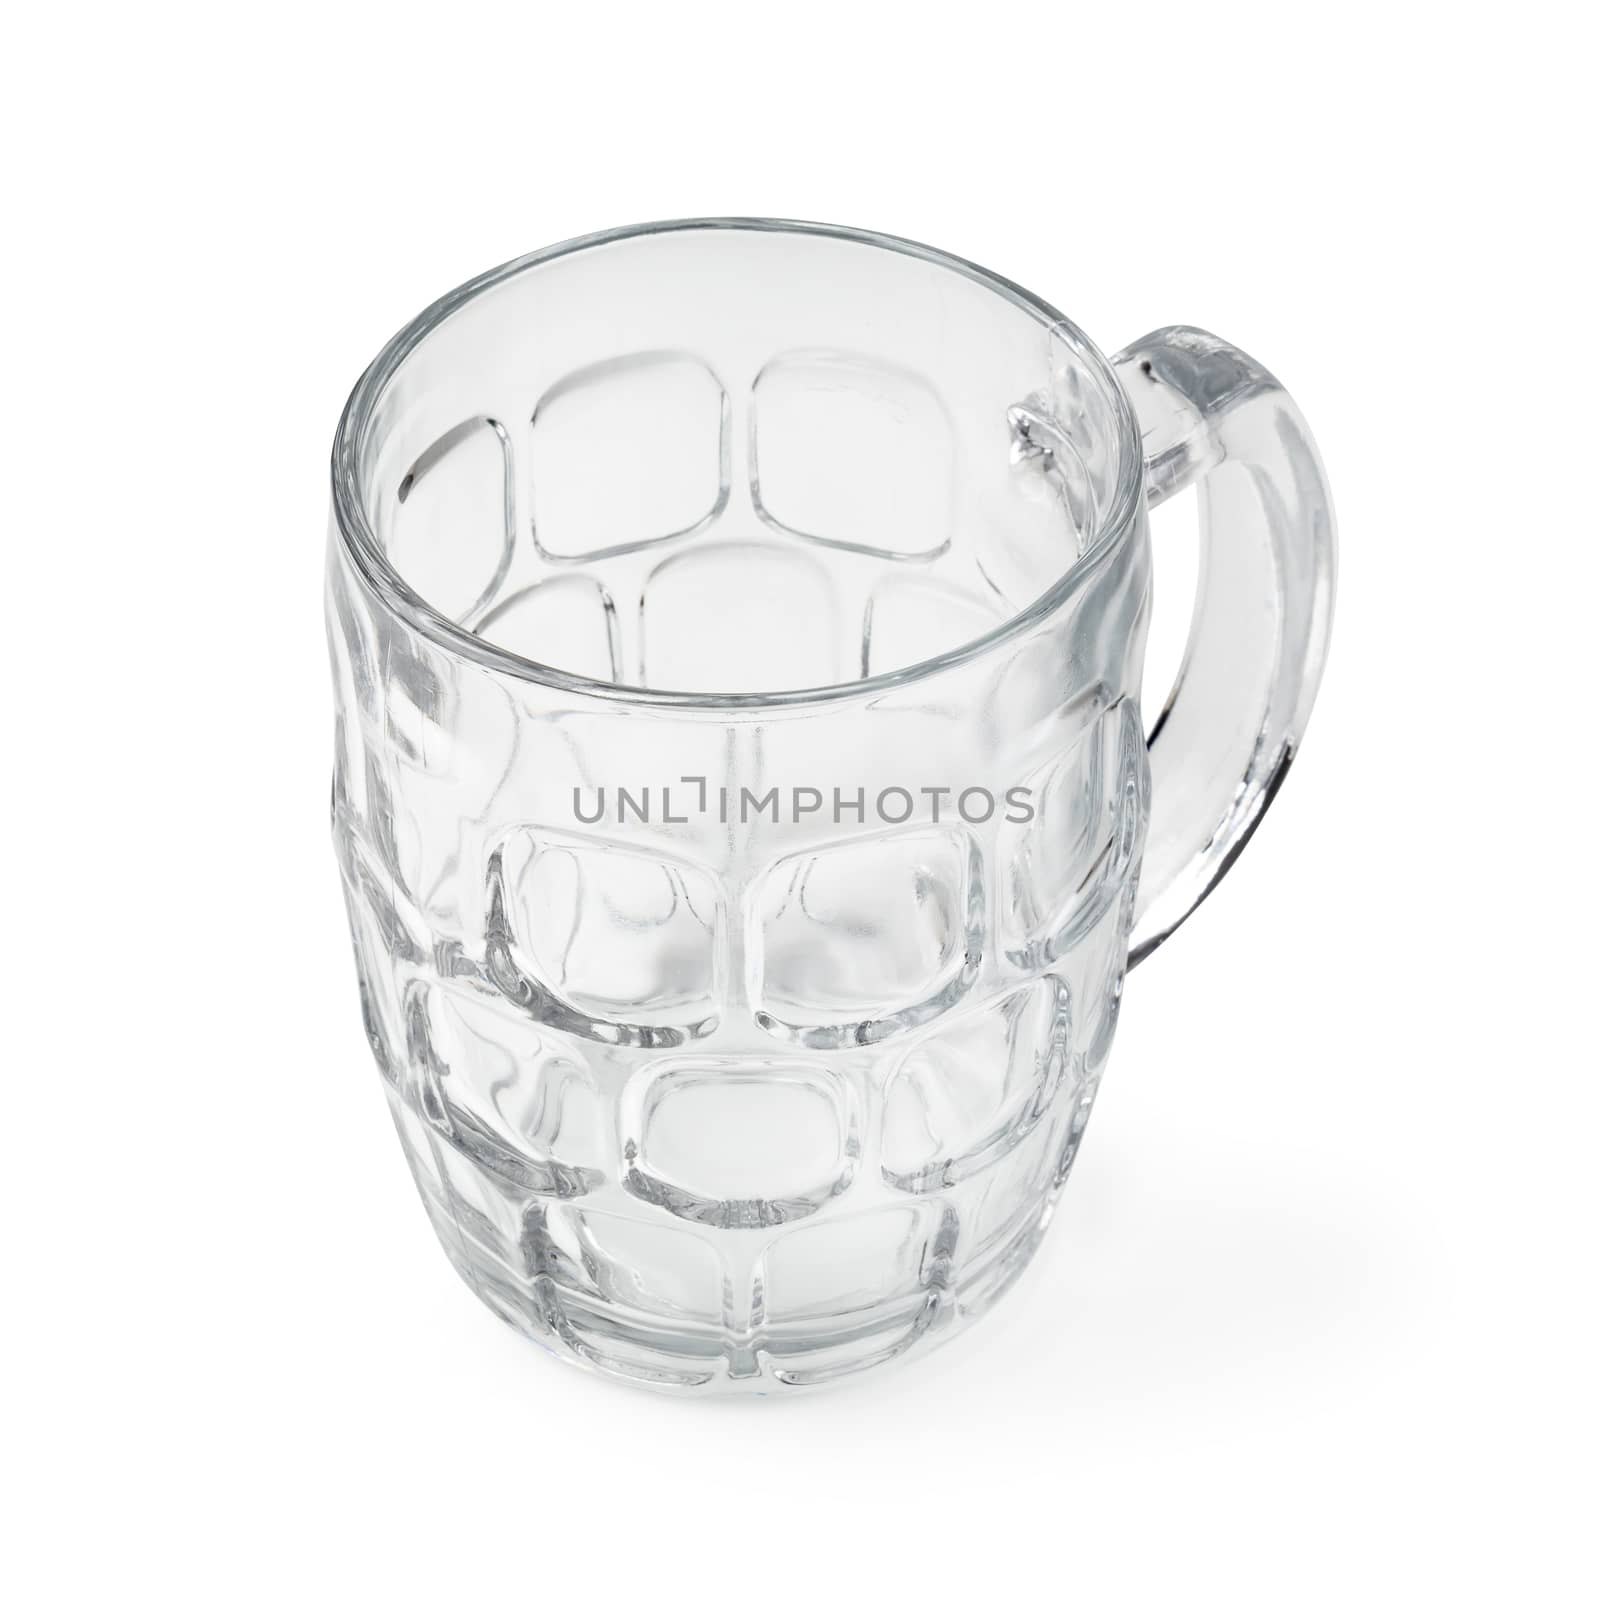 Cocktail glass. Empty beer mug isolated on a white background by kaiskynet